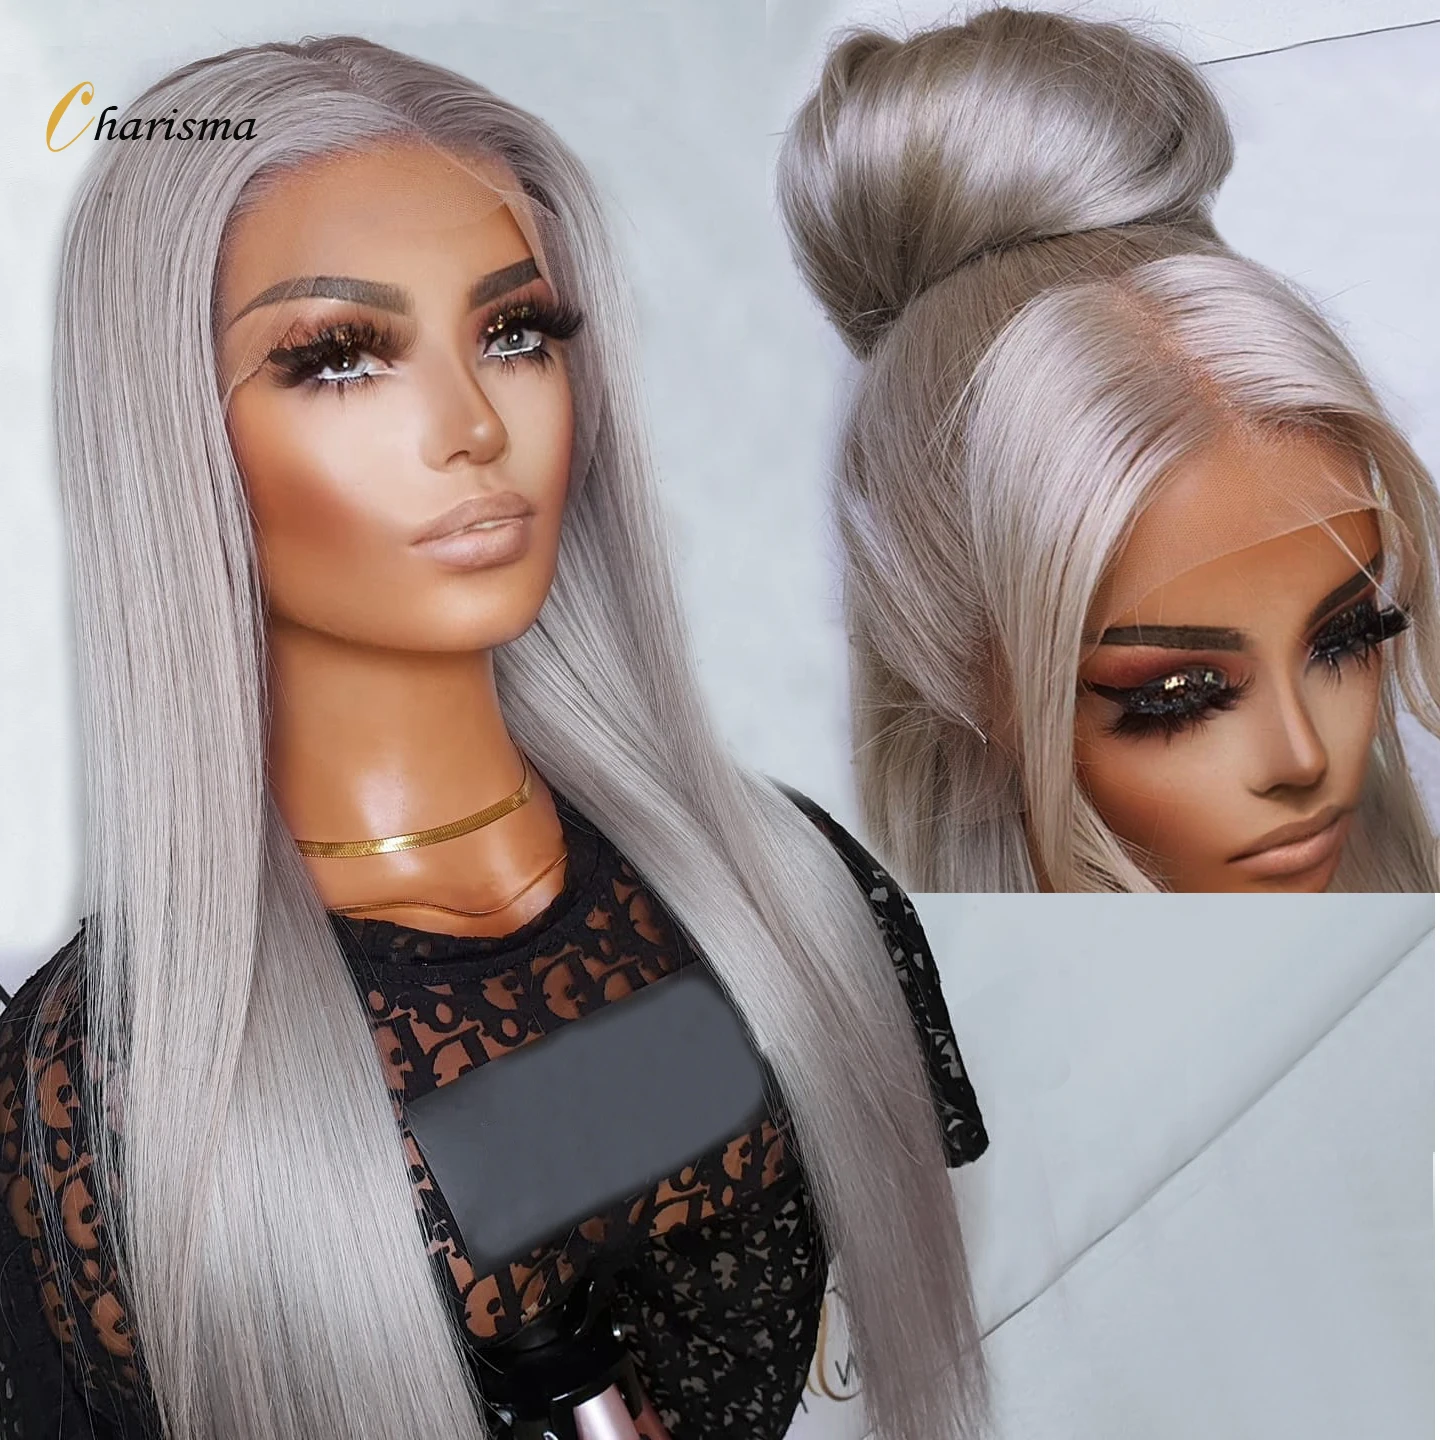 Charisma Gray Synthetic Lace Wigs Long Straight Heat Resistant Lace Front Wig Grey Wigs Natural Hair Wigs for Women Cosplay Wig